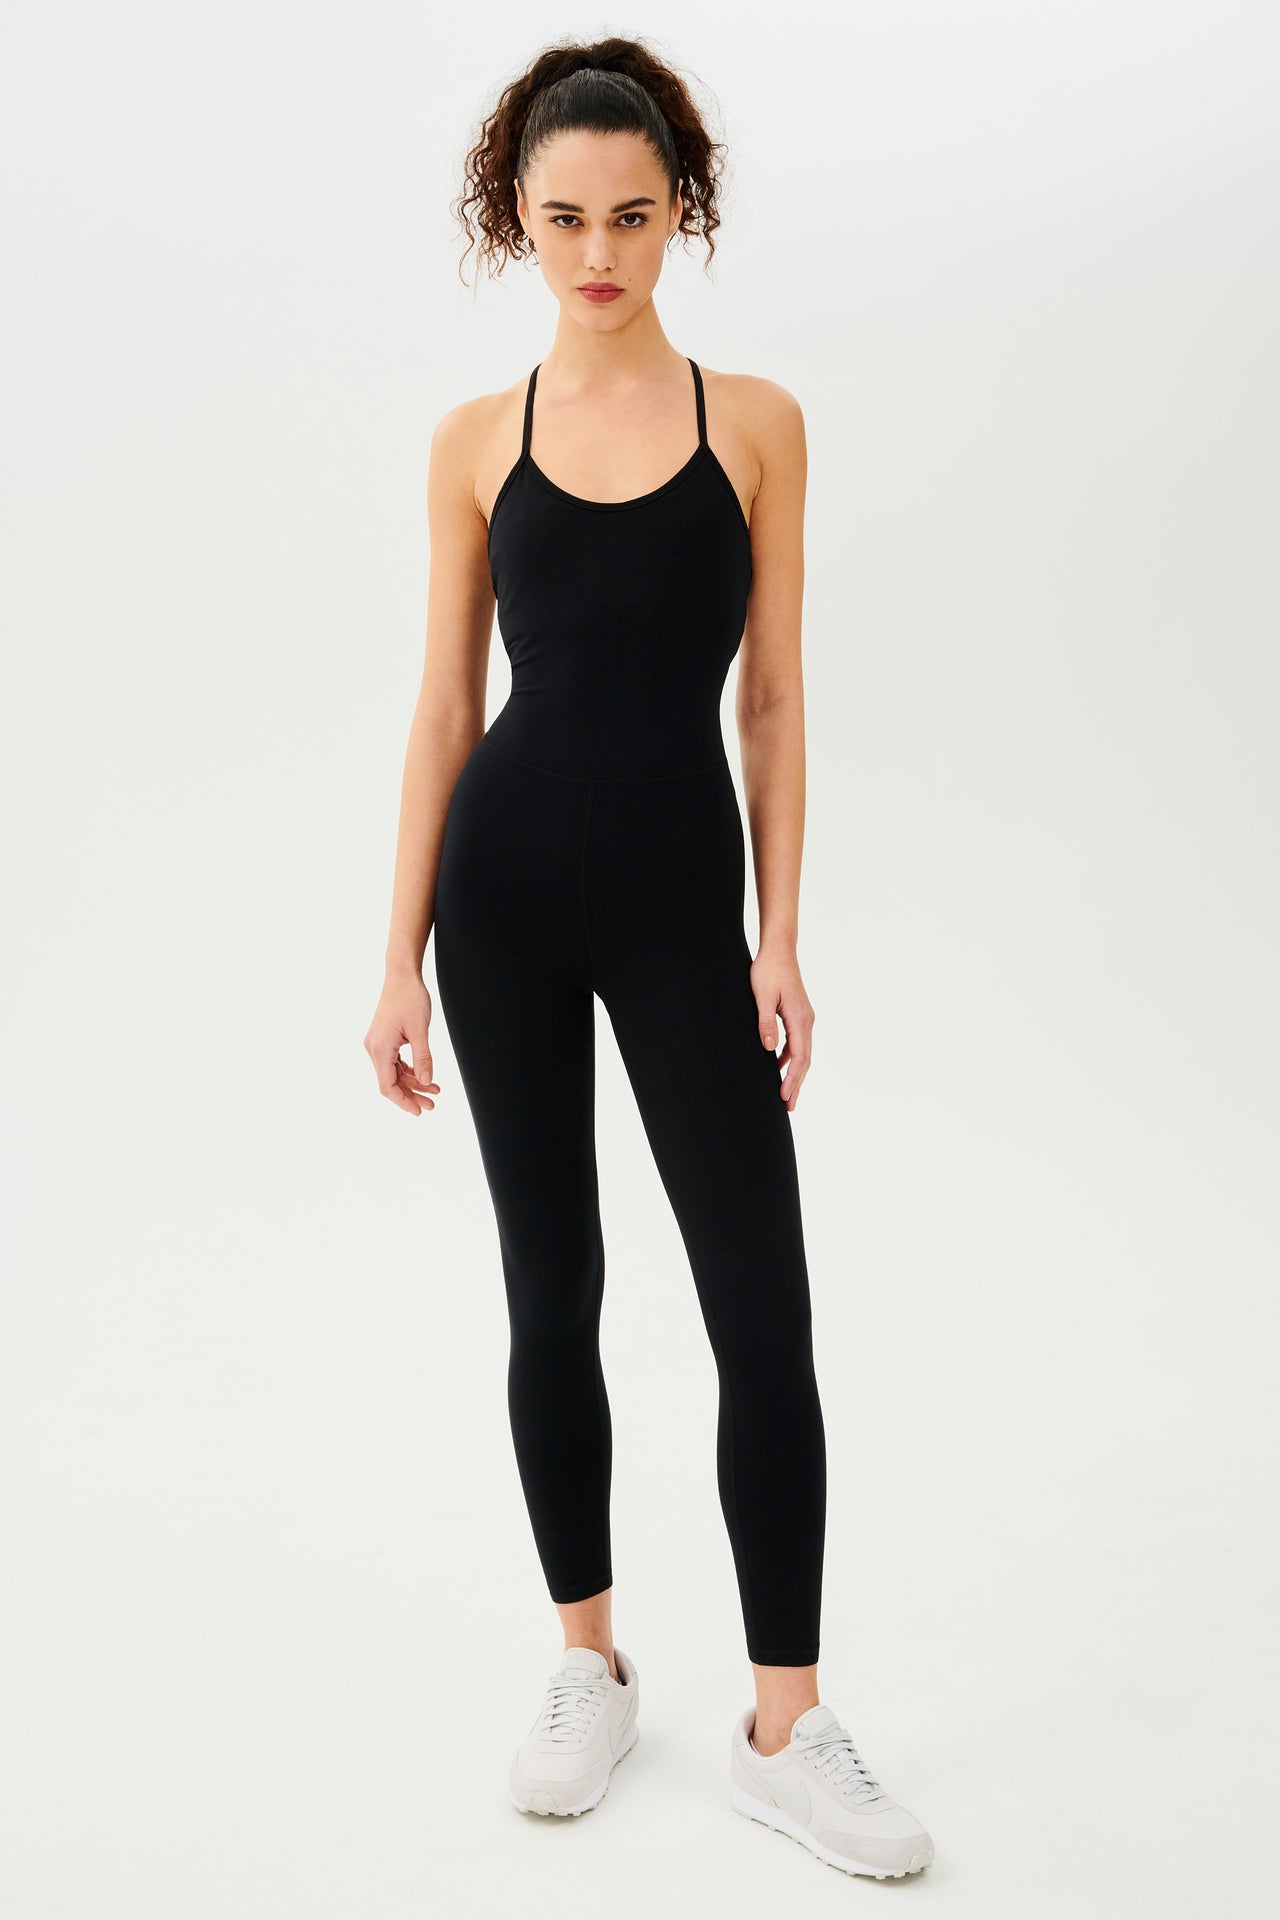 Full front view of  girl wearing black one piece with leggings and spaghetti straps